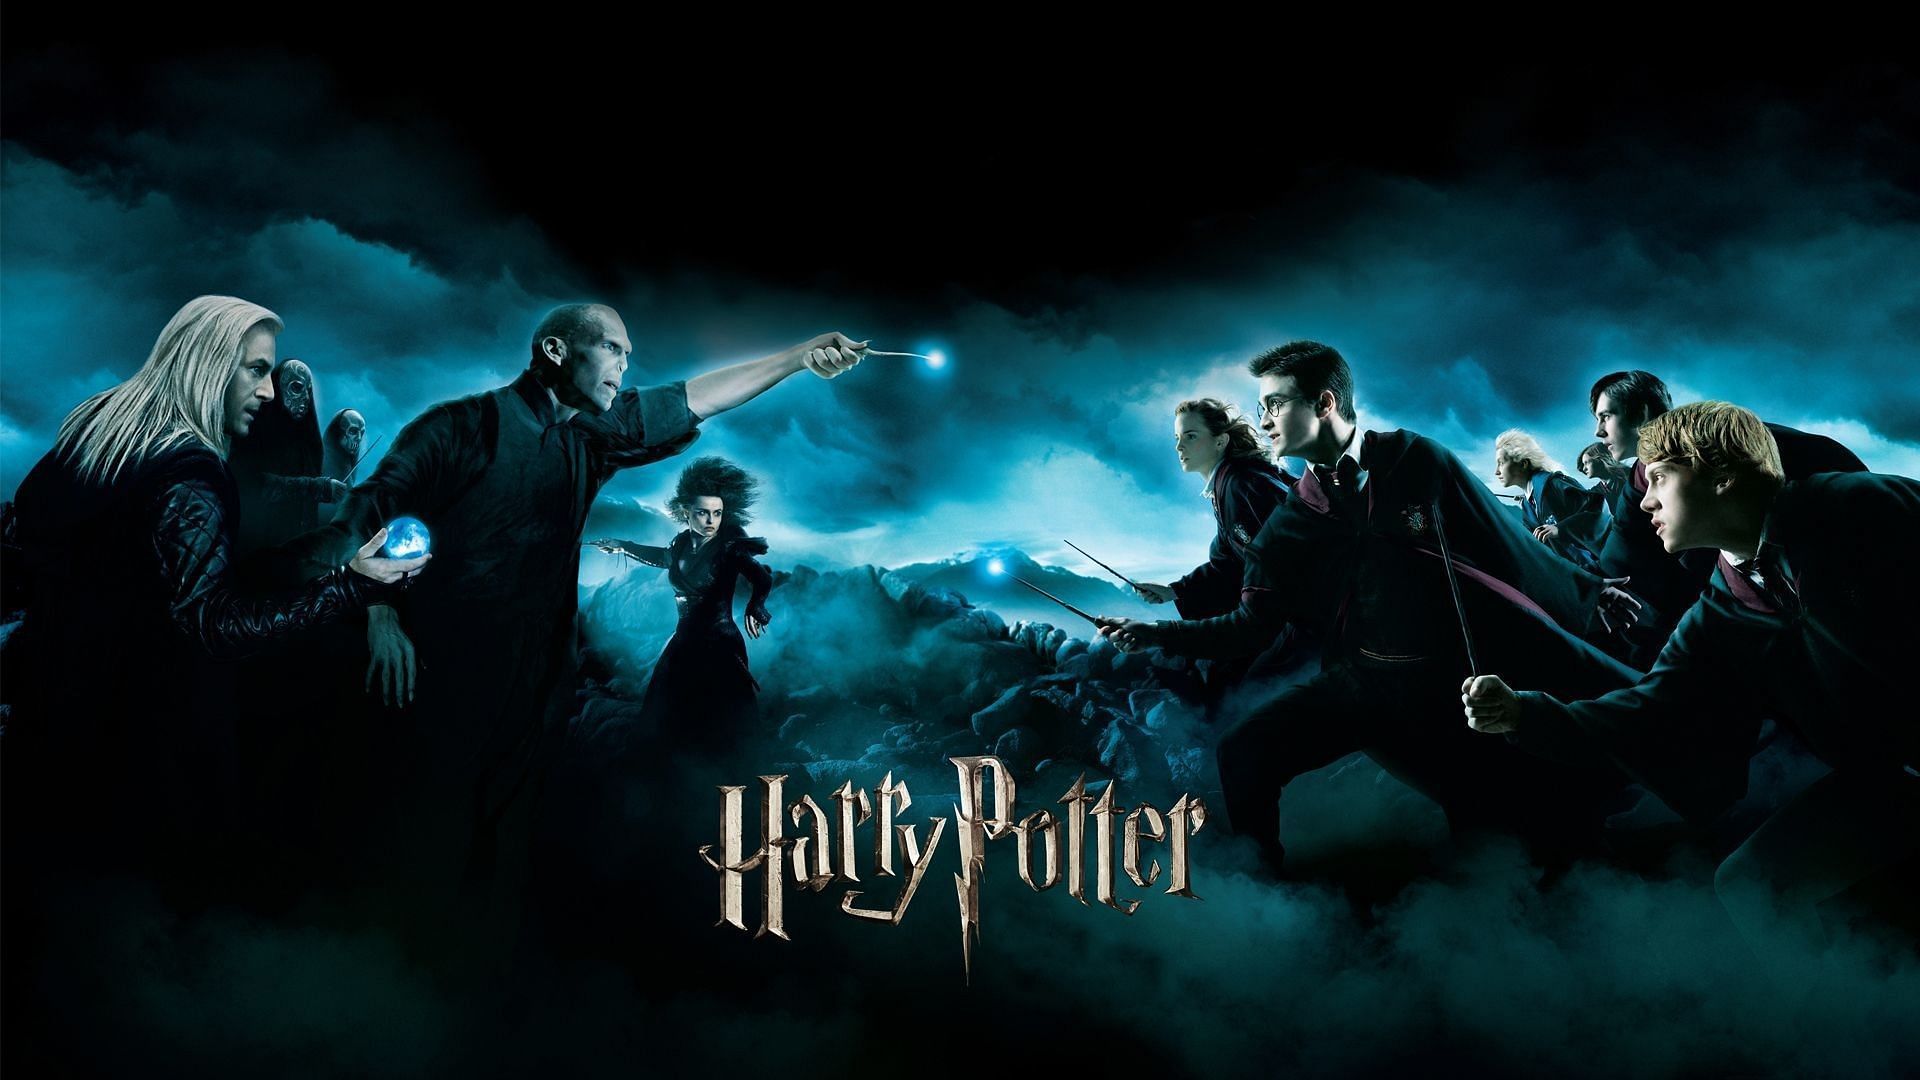 How to Watch the Harry Potter Movies in Chronological Order